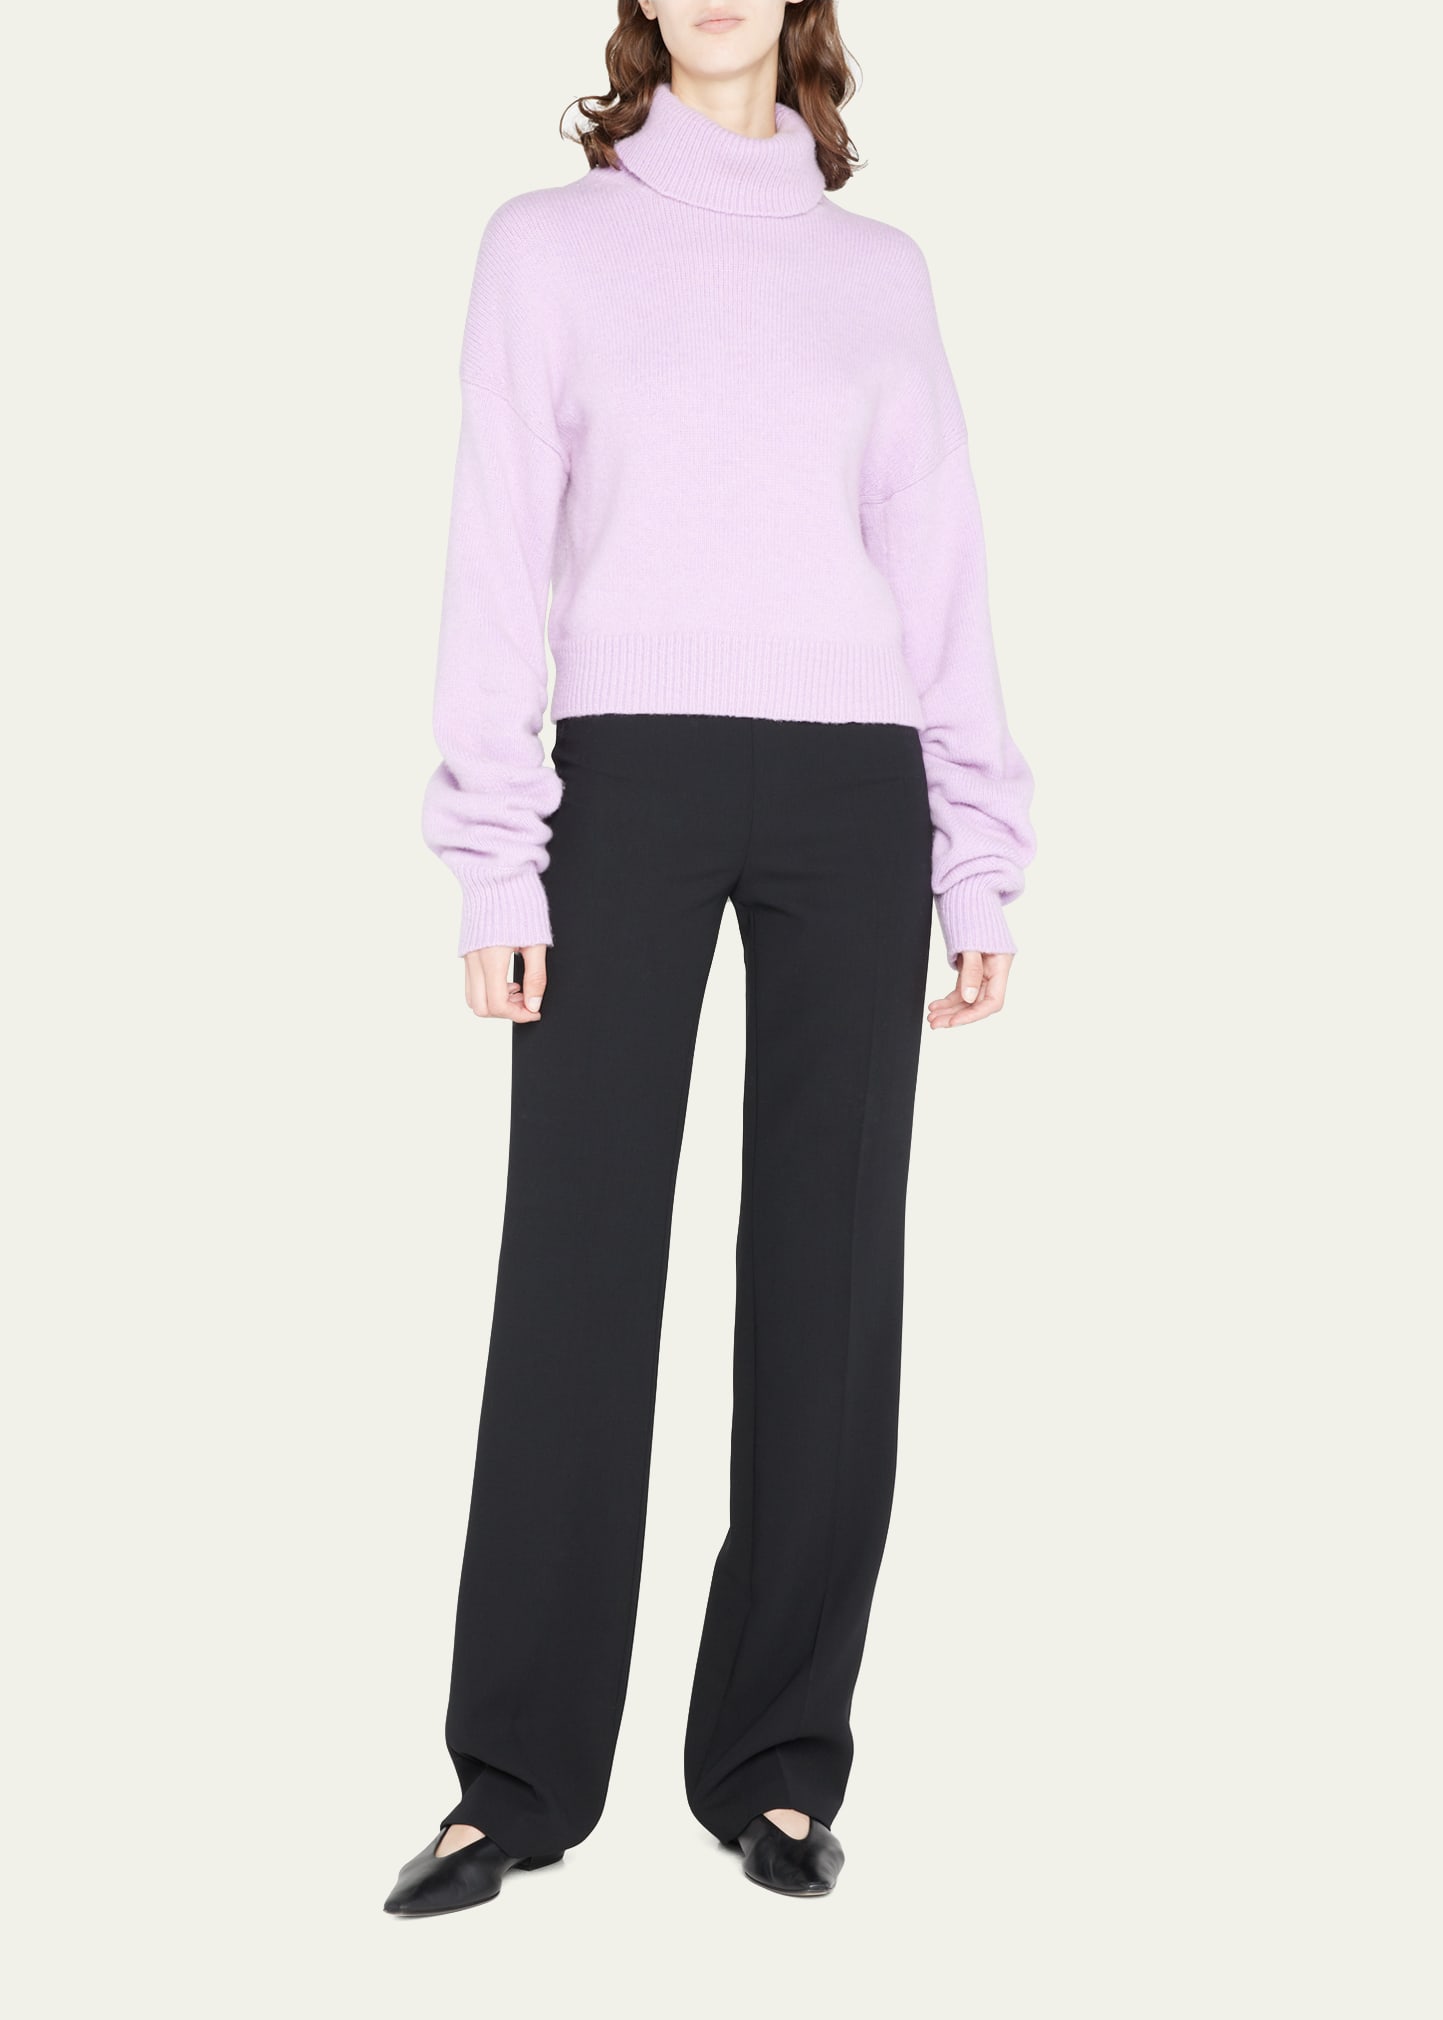 A.L.C. Taryn Wool Turtleneck Sweater with Ruched Sleeves